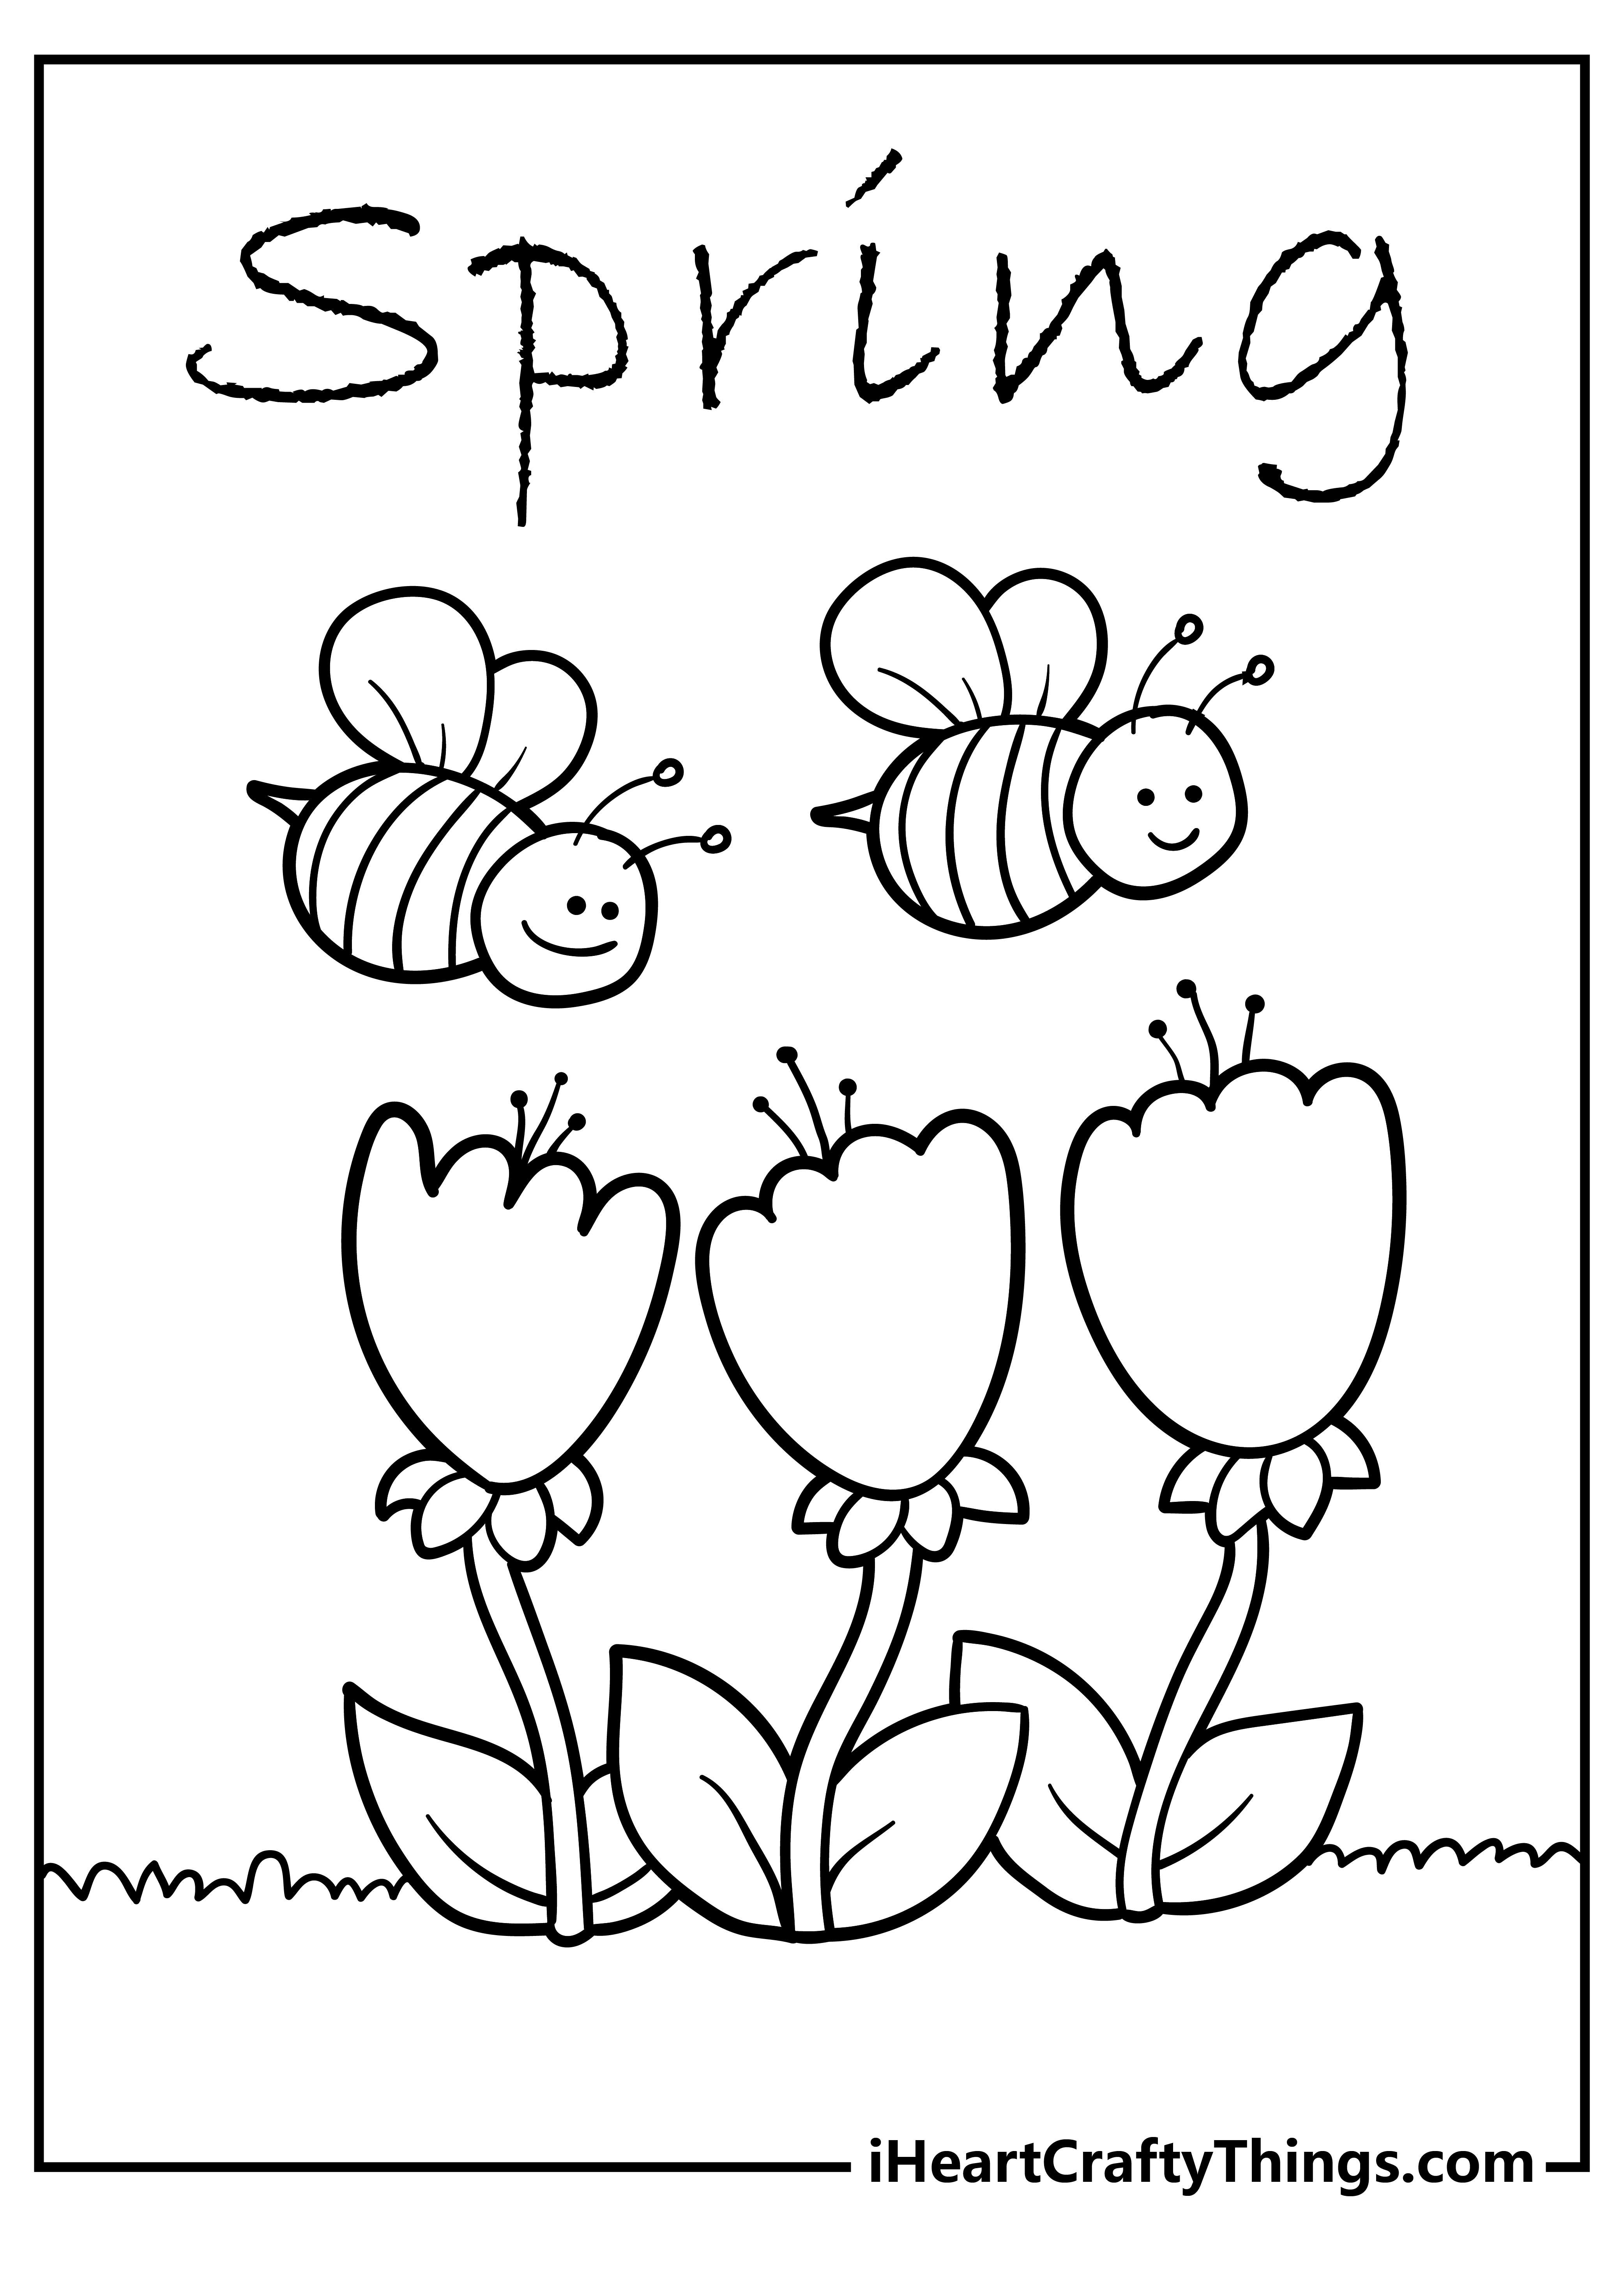 Coloring Pages For Kids Inspiring